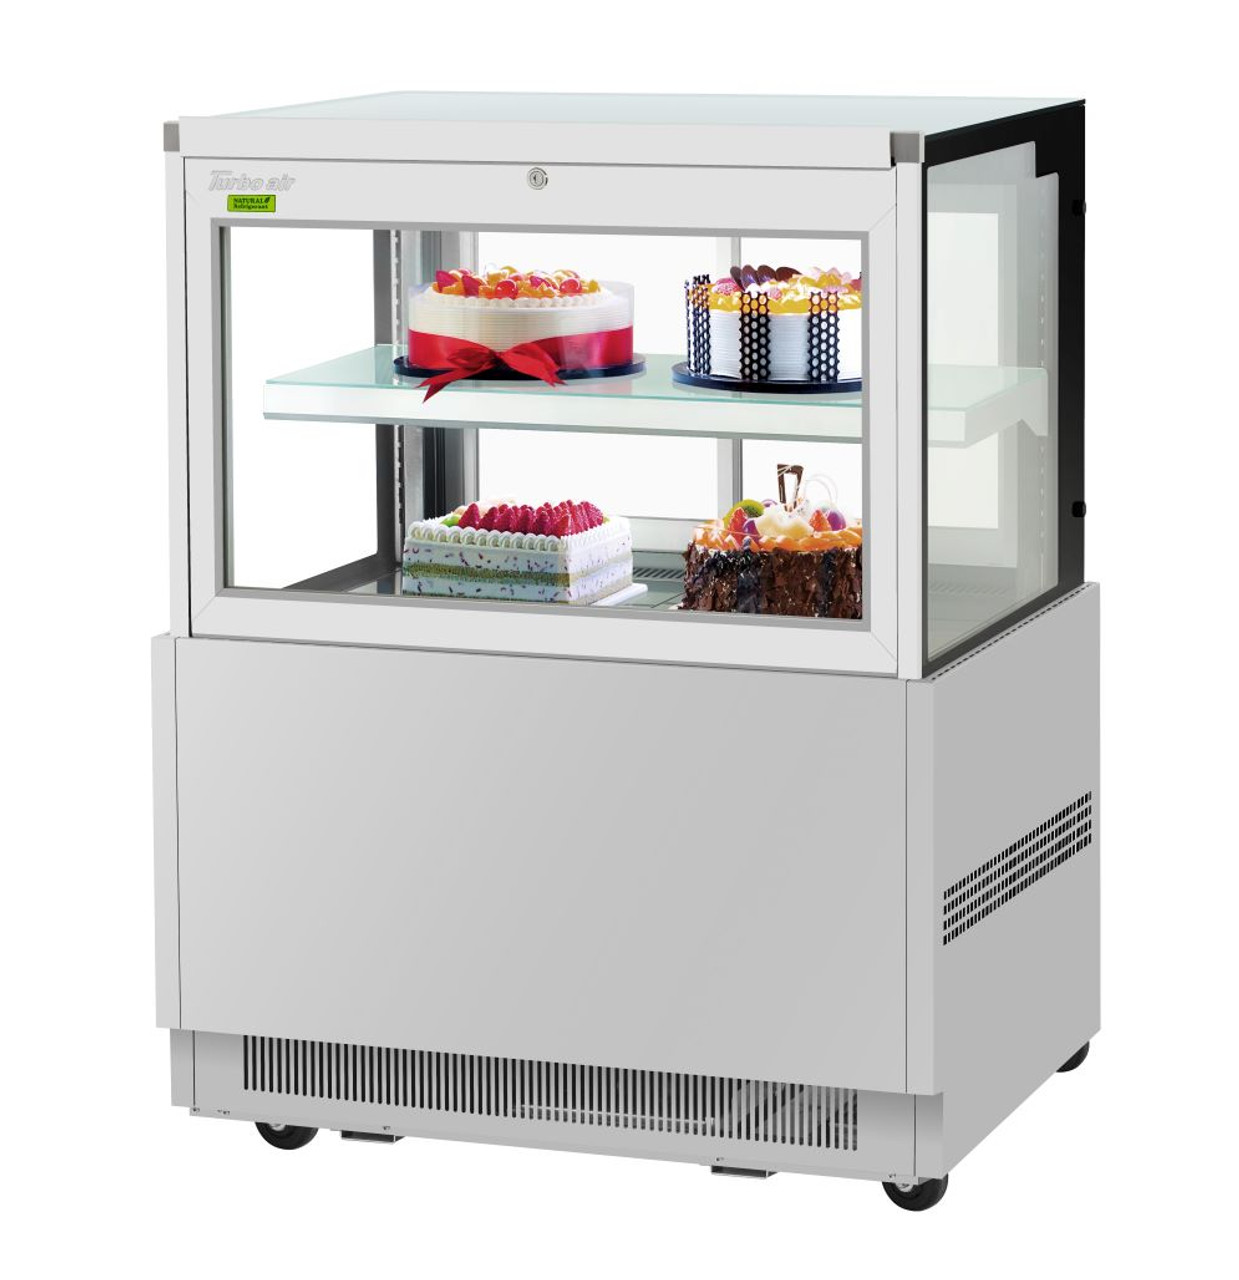 Turbo Air Bakery display case, Refrigerated TBP36-46FN-S